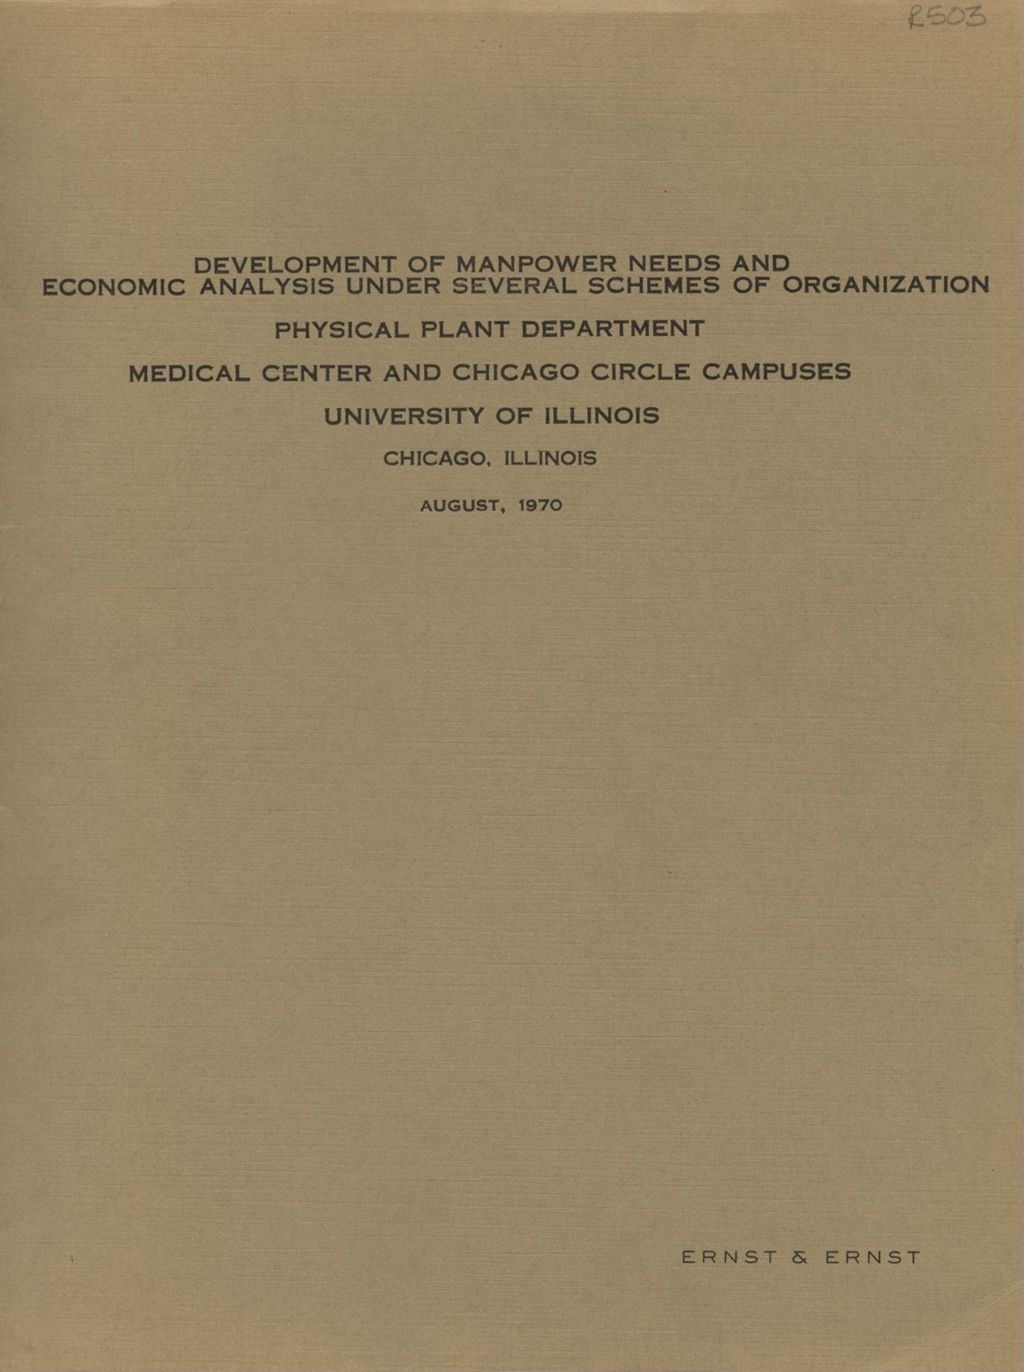 Miniature of Development of Manpower Needs and Economic Analysis Under Several Schemes of Organization, Physical Plant Department, Medical Center and Chicago Circle Campuses, University of Illinois